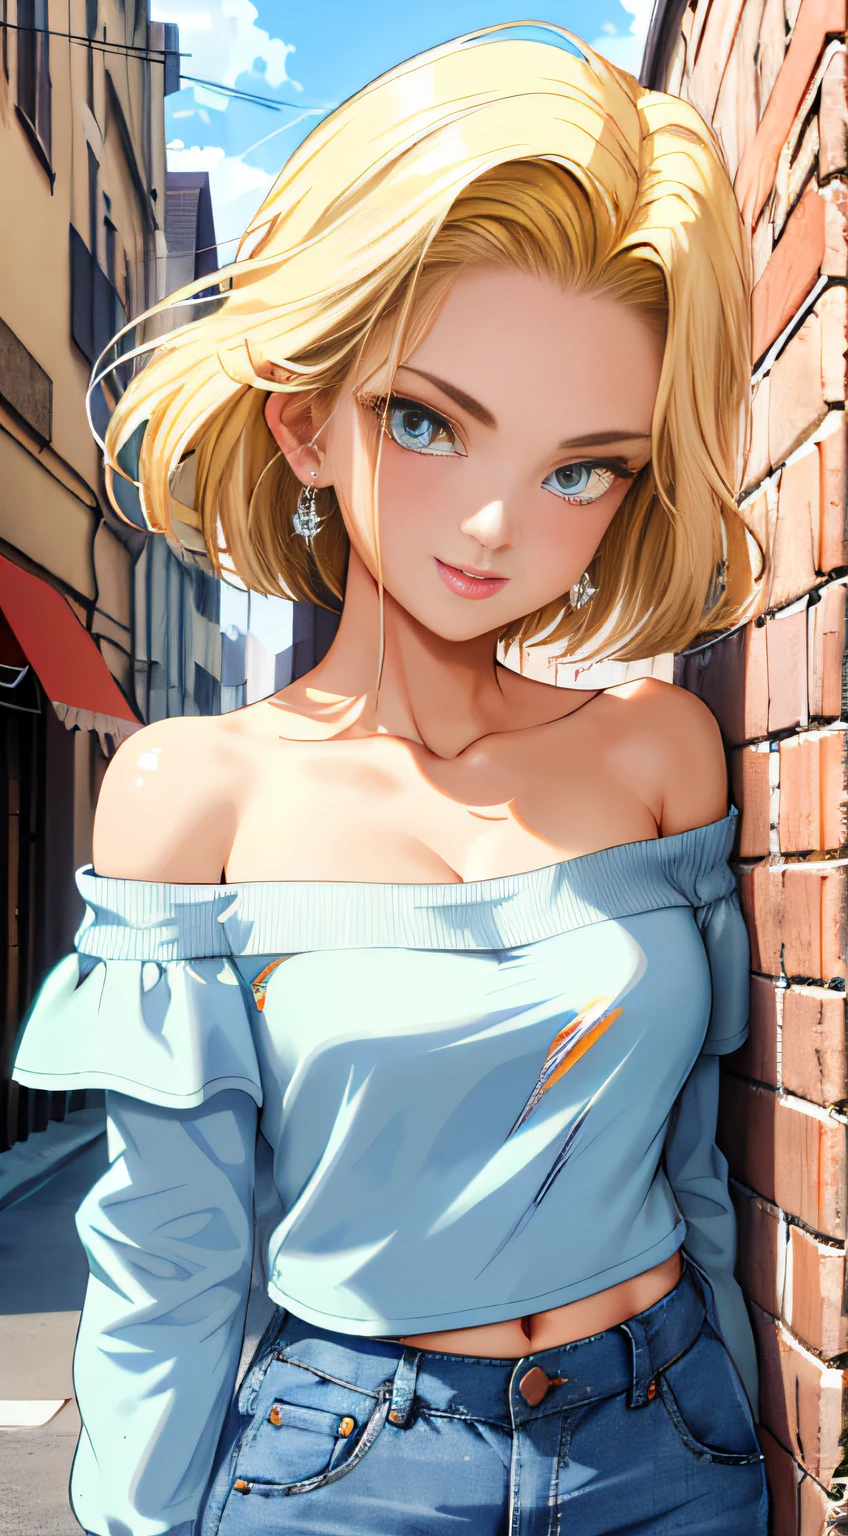 tmasterpiece， Best quality at best， ultra - detailed， absurderes， Portrait beautiful Android18DB， solo， 耳Nipple Ring， (Bikini:1.5)，underdressing，jewely， (Off-the-shoulder attire:1.5)，cleavage， upperbody closeup，ssmile， thongs， vests， ​​clouds， Skysky， daysies， exteriors，Denim super shorts，best qualtiy， tmasterpiece， intricately details， Tone-mapping， Sharp focus， ultra - detailed， Artstati is the trend，lips, perfect face, blush, lover, large breasts